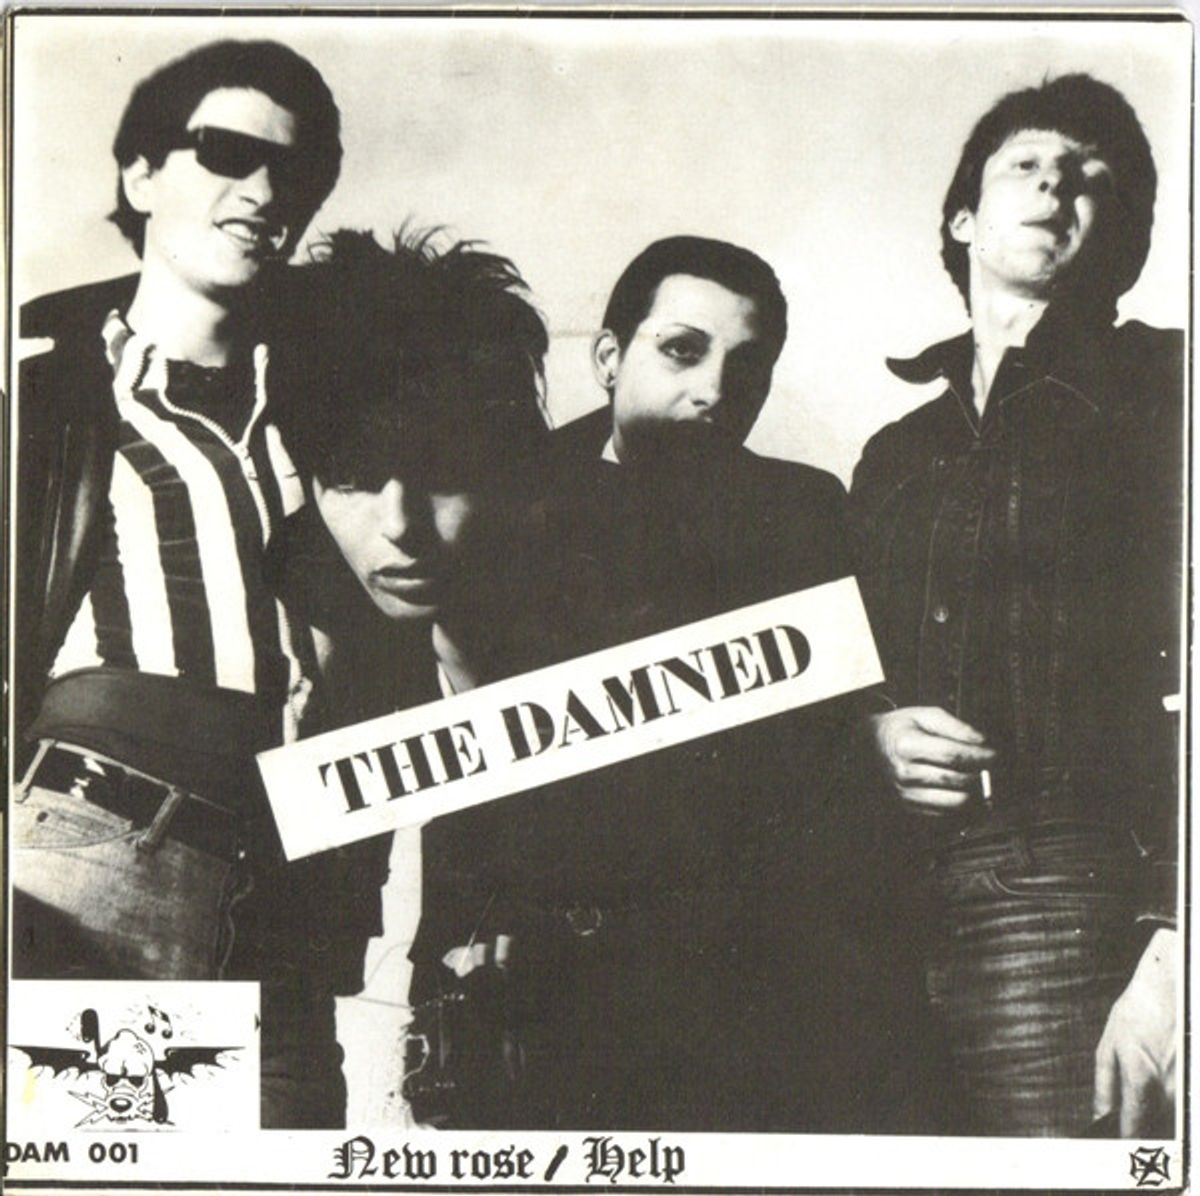 #MoreMoore - The Damned - New Rose (1976)